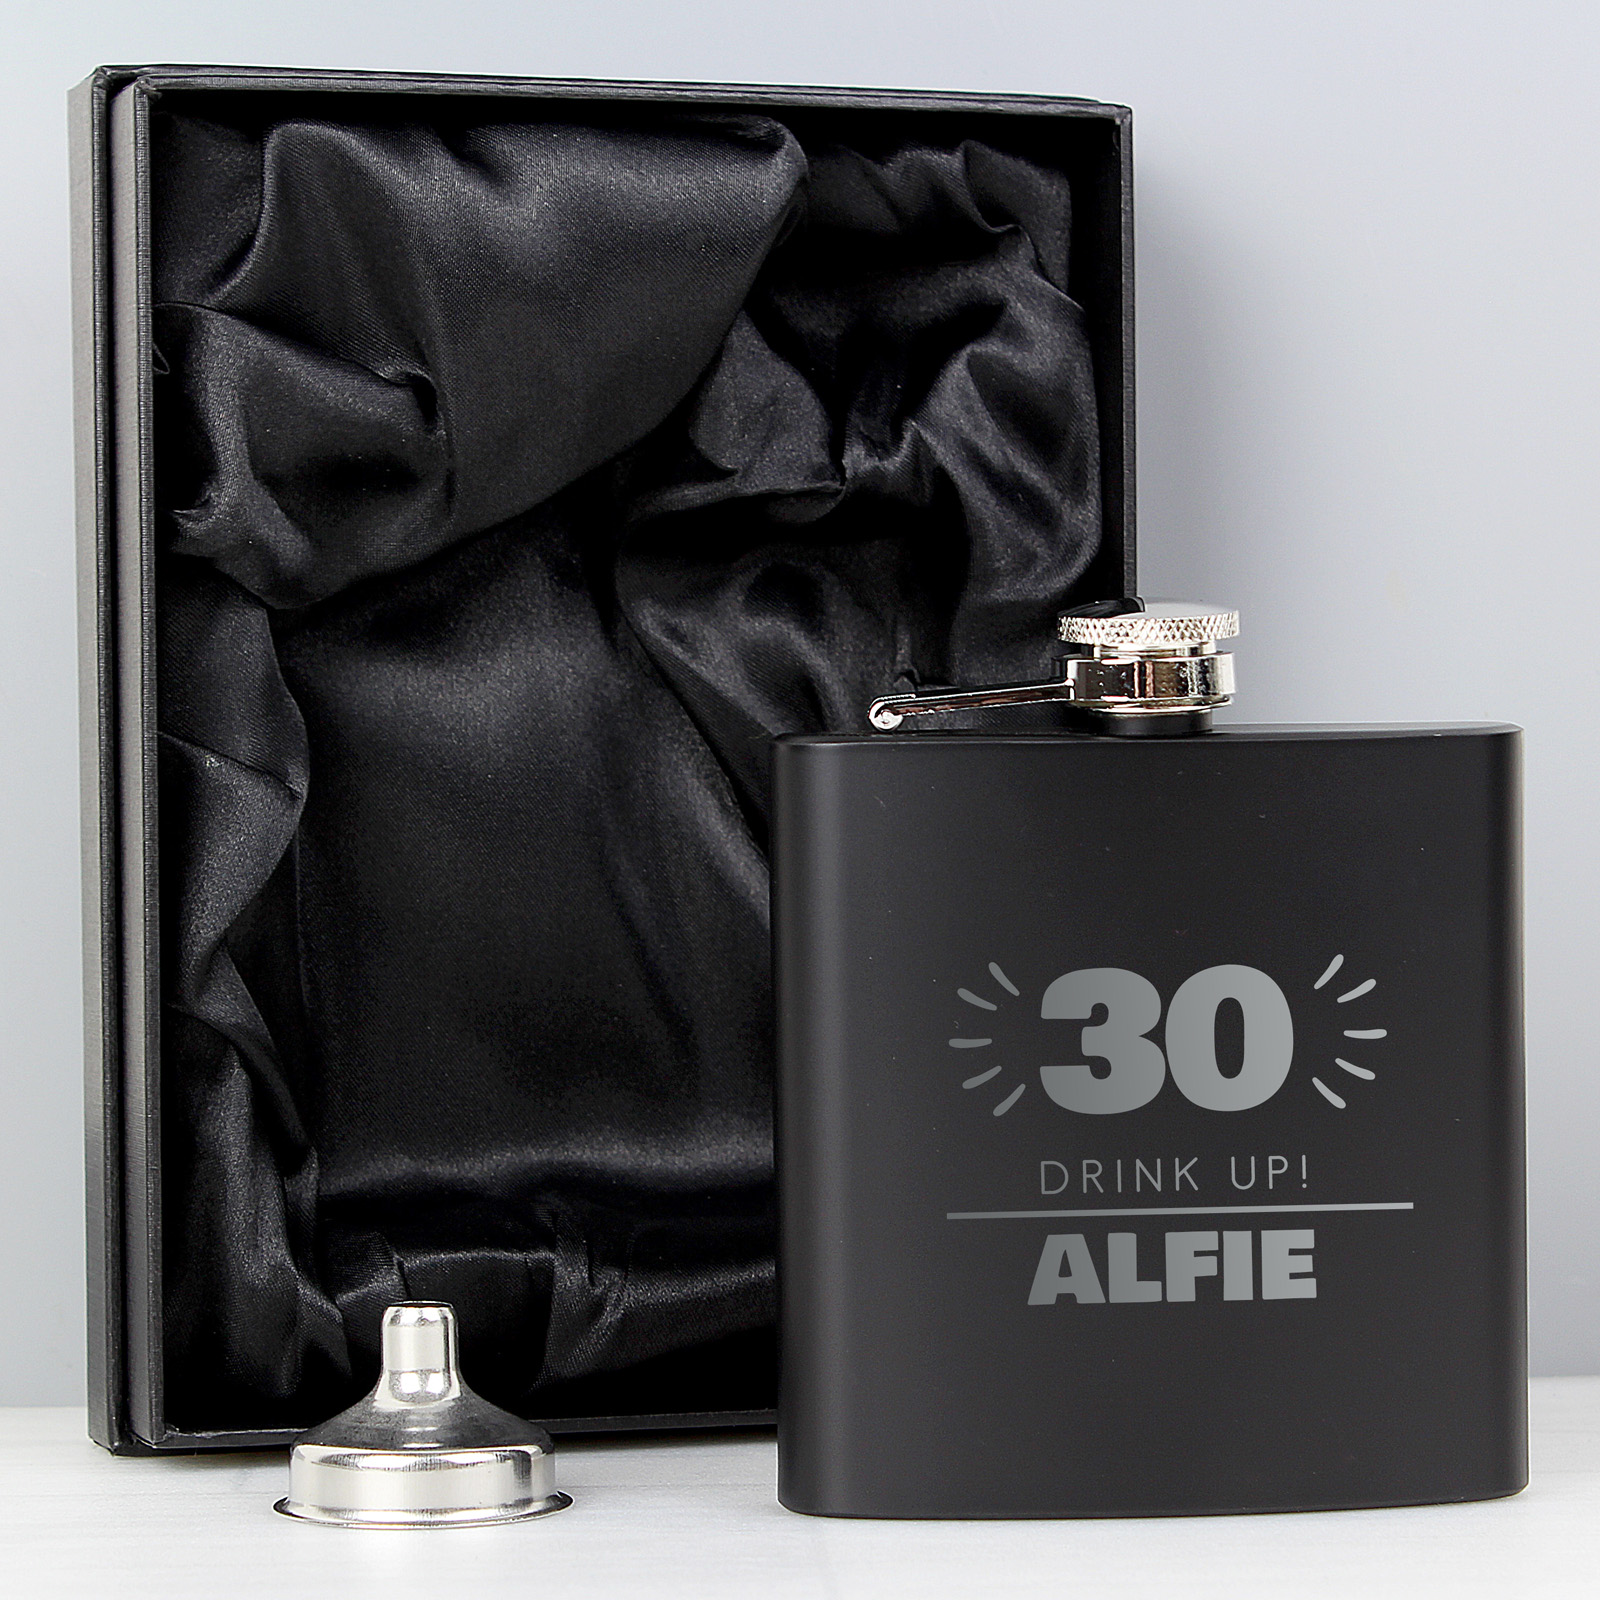 Personalised 70th Birthday Hip Flask - Black & Silver